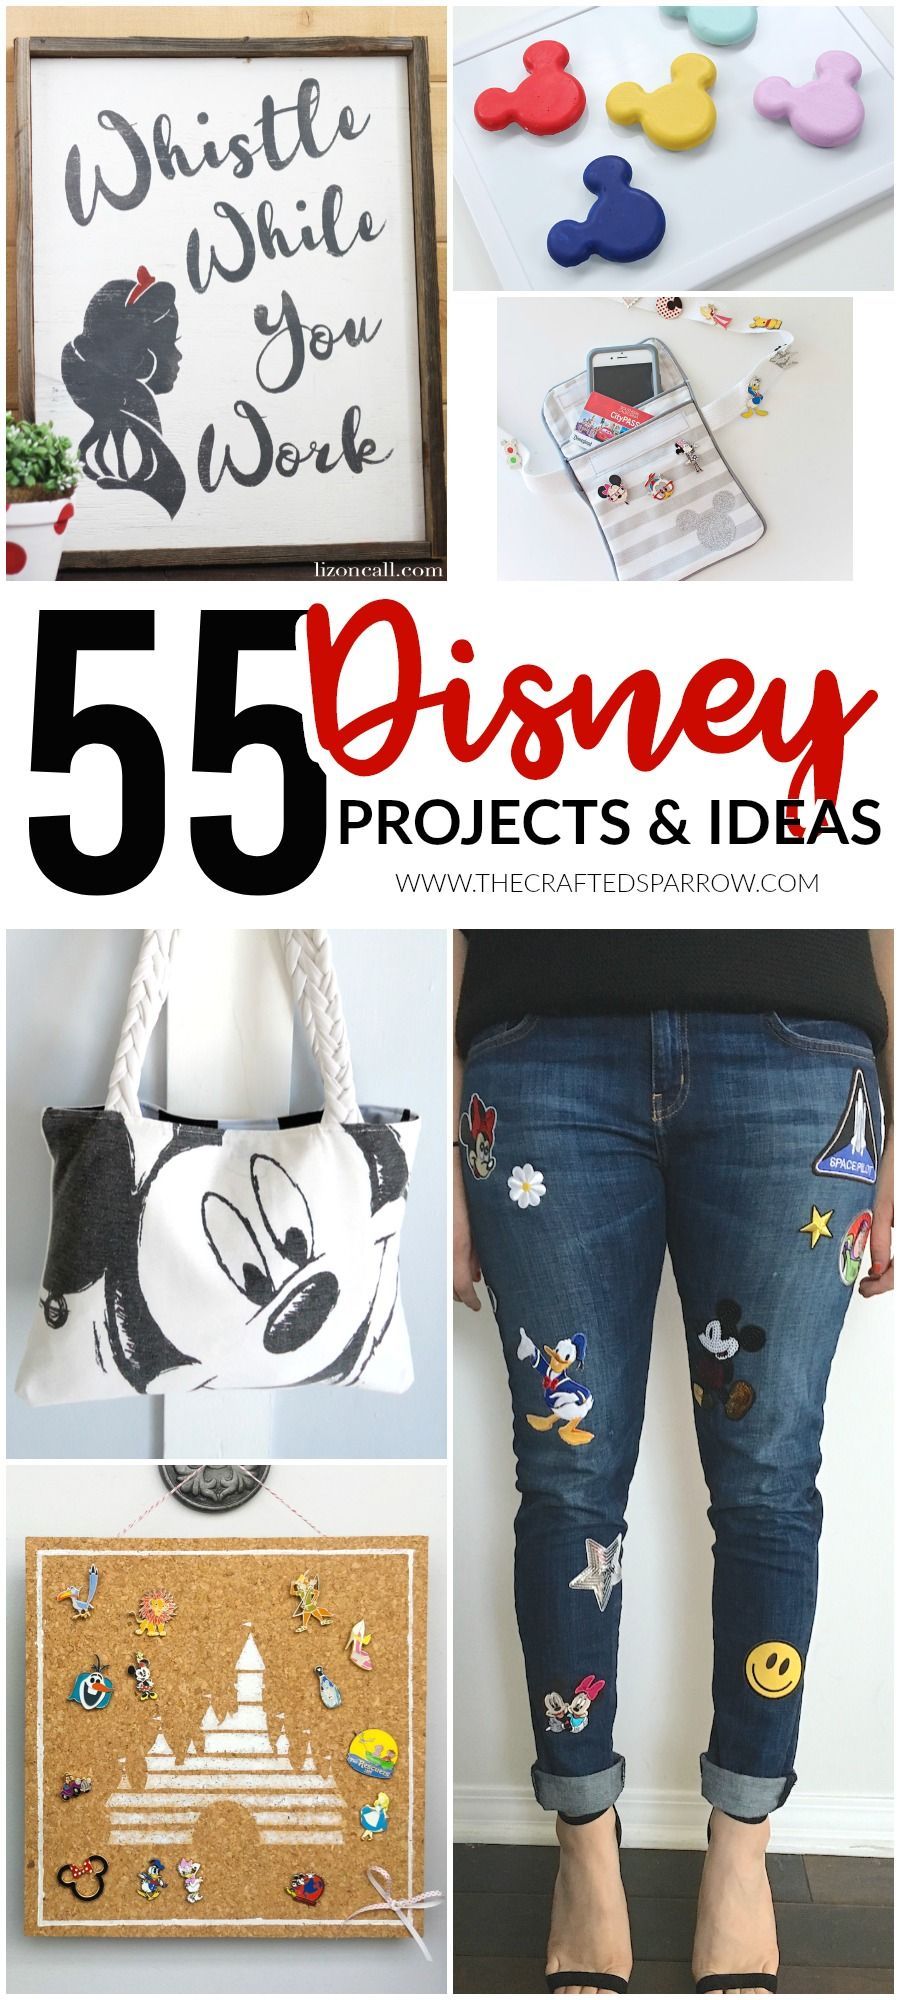 Make your Disney trip or every day life a little more magical with one of these amazing 55 Disney Projects & Ideas! Something for